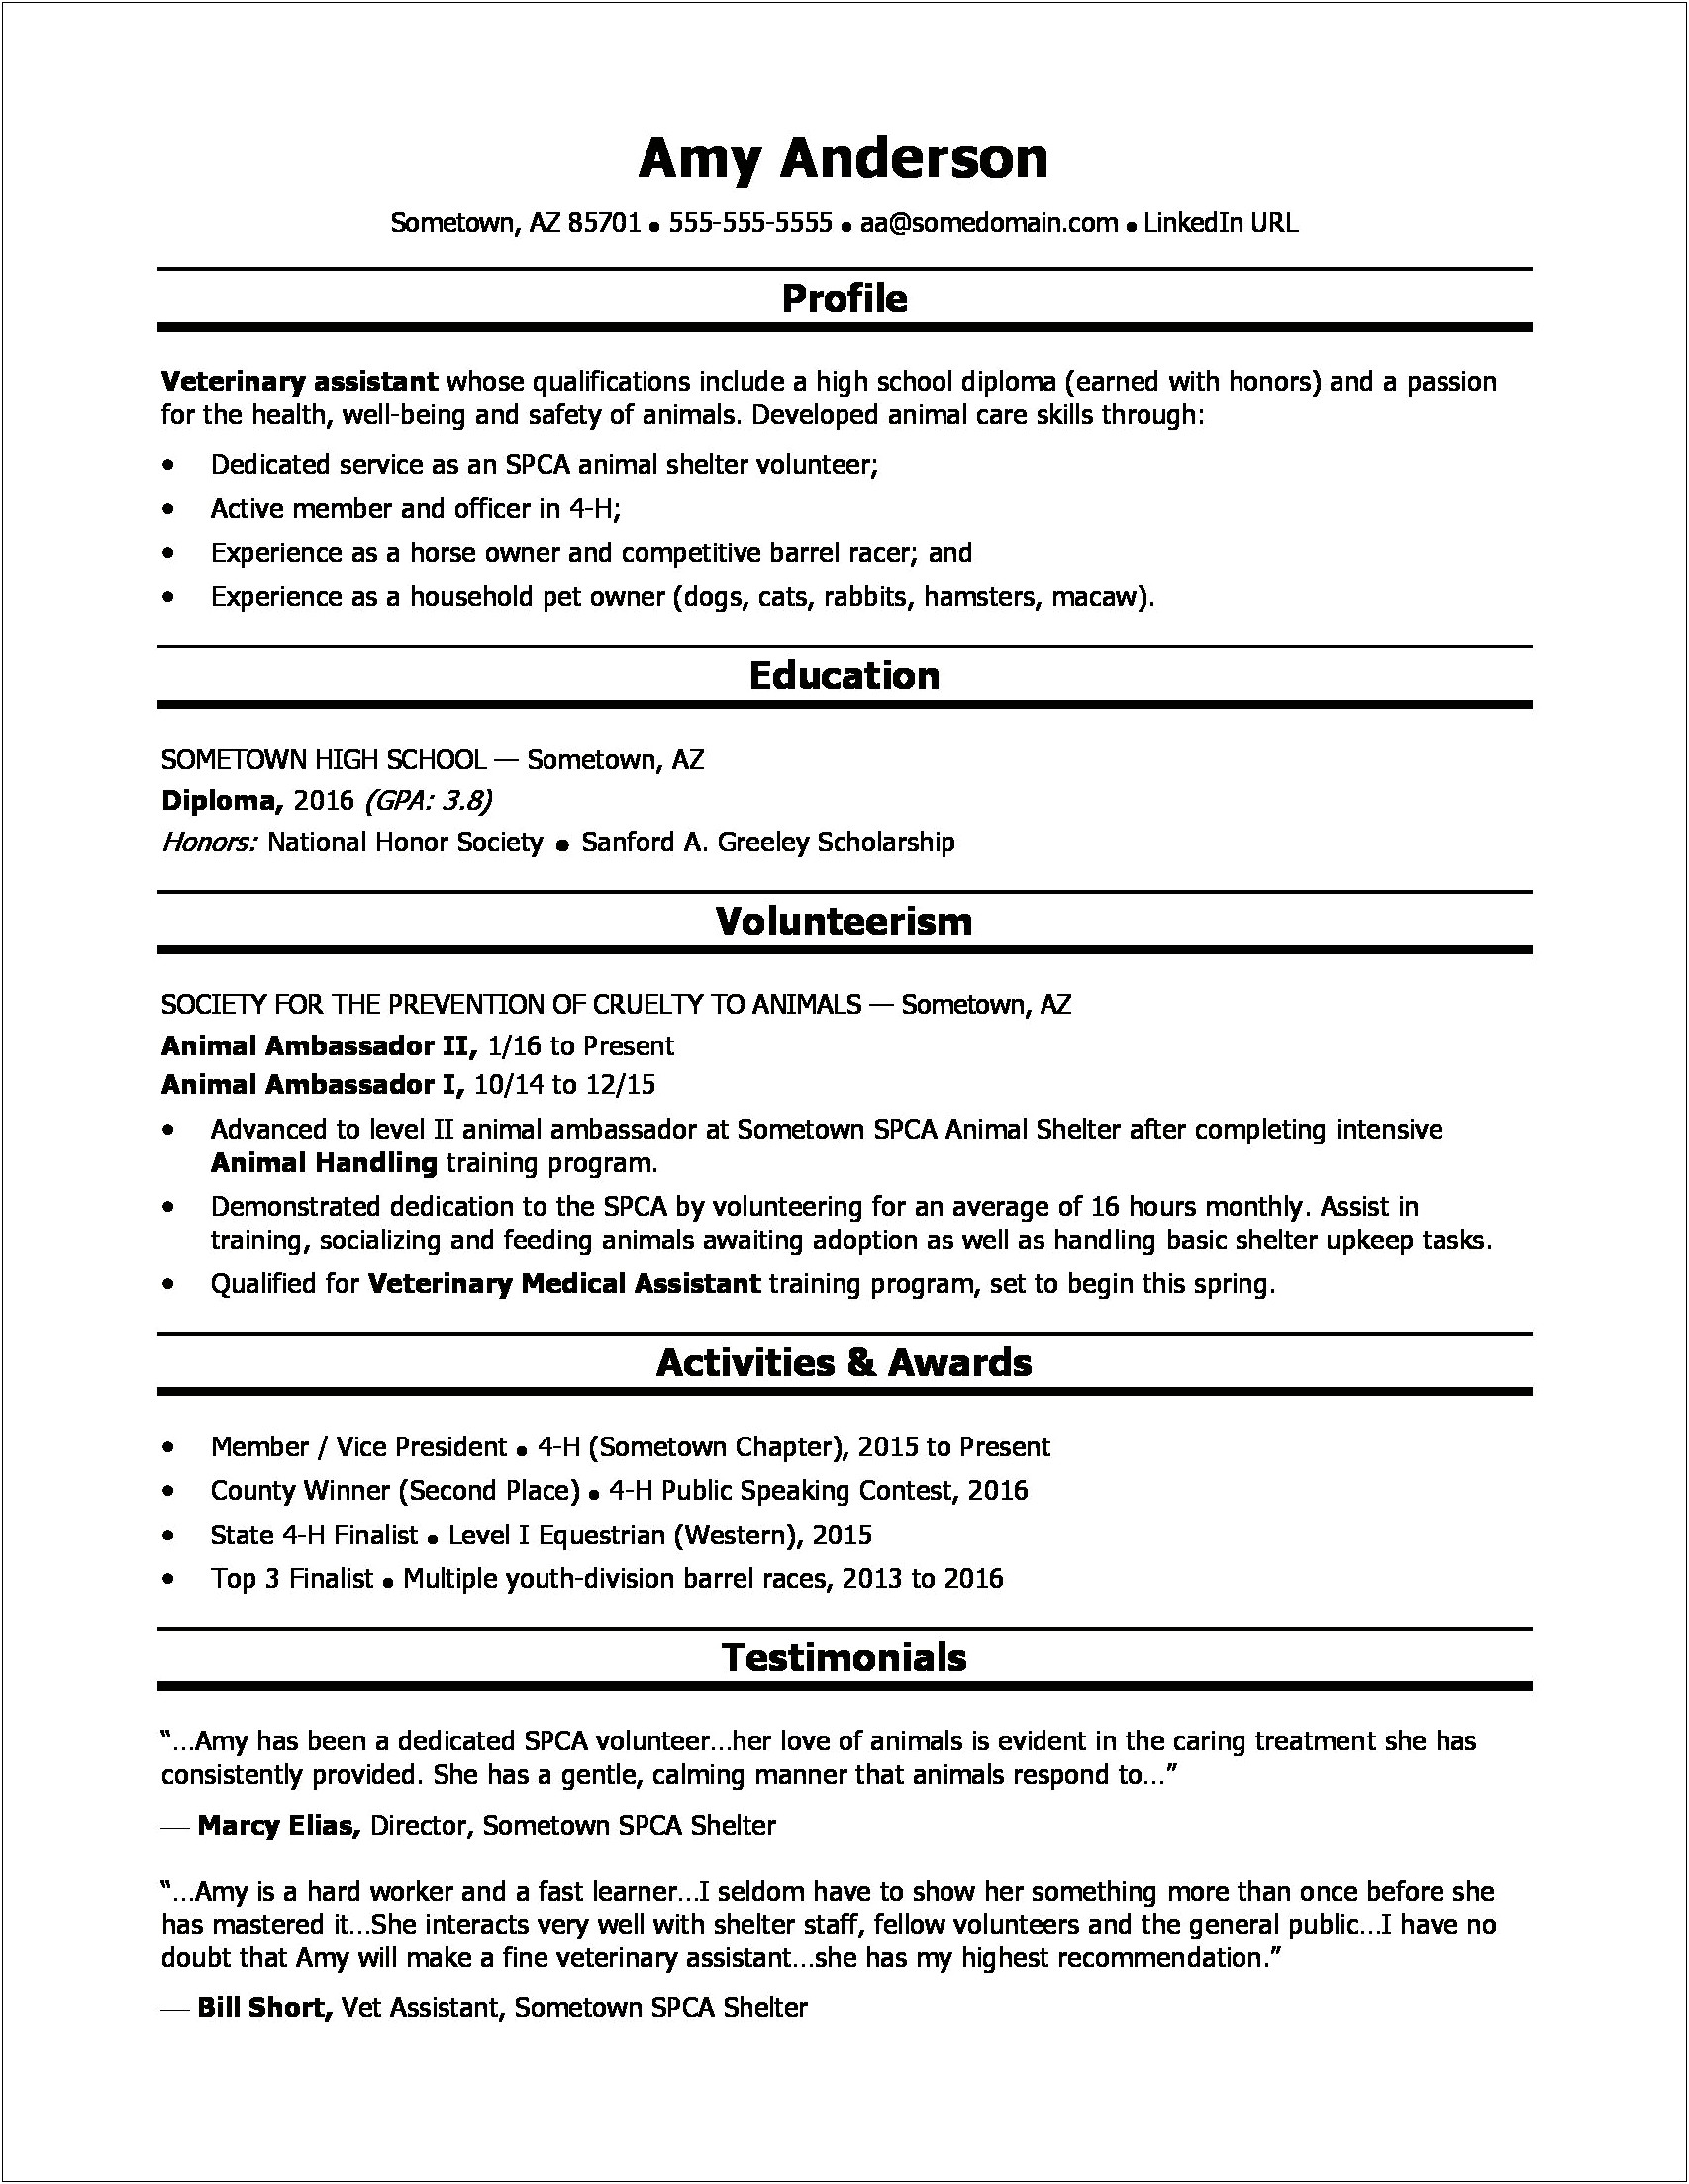 Resume Outline For High School Student Just Graduating